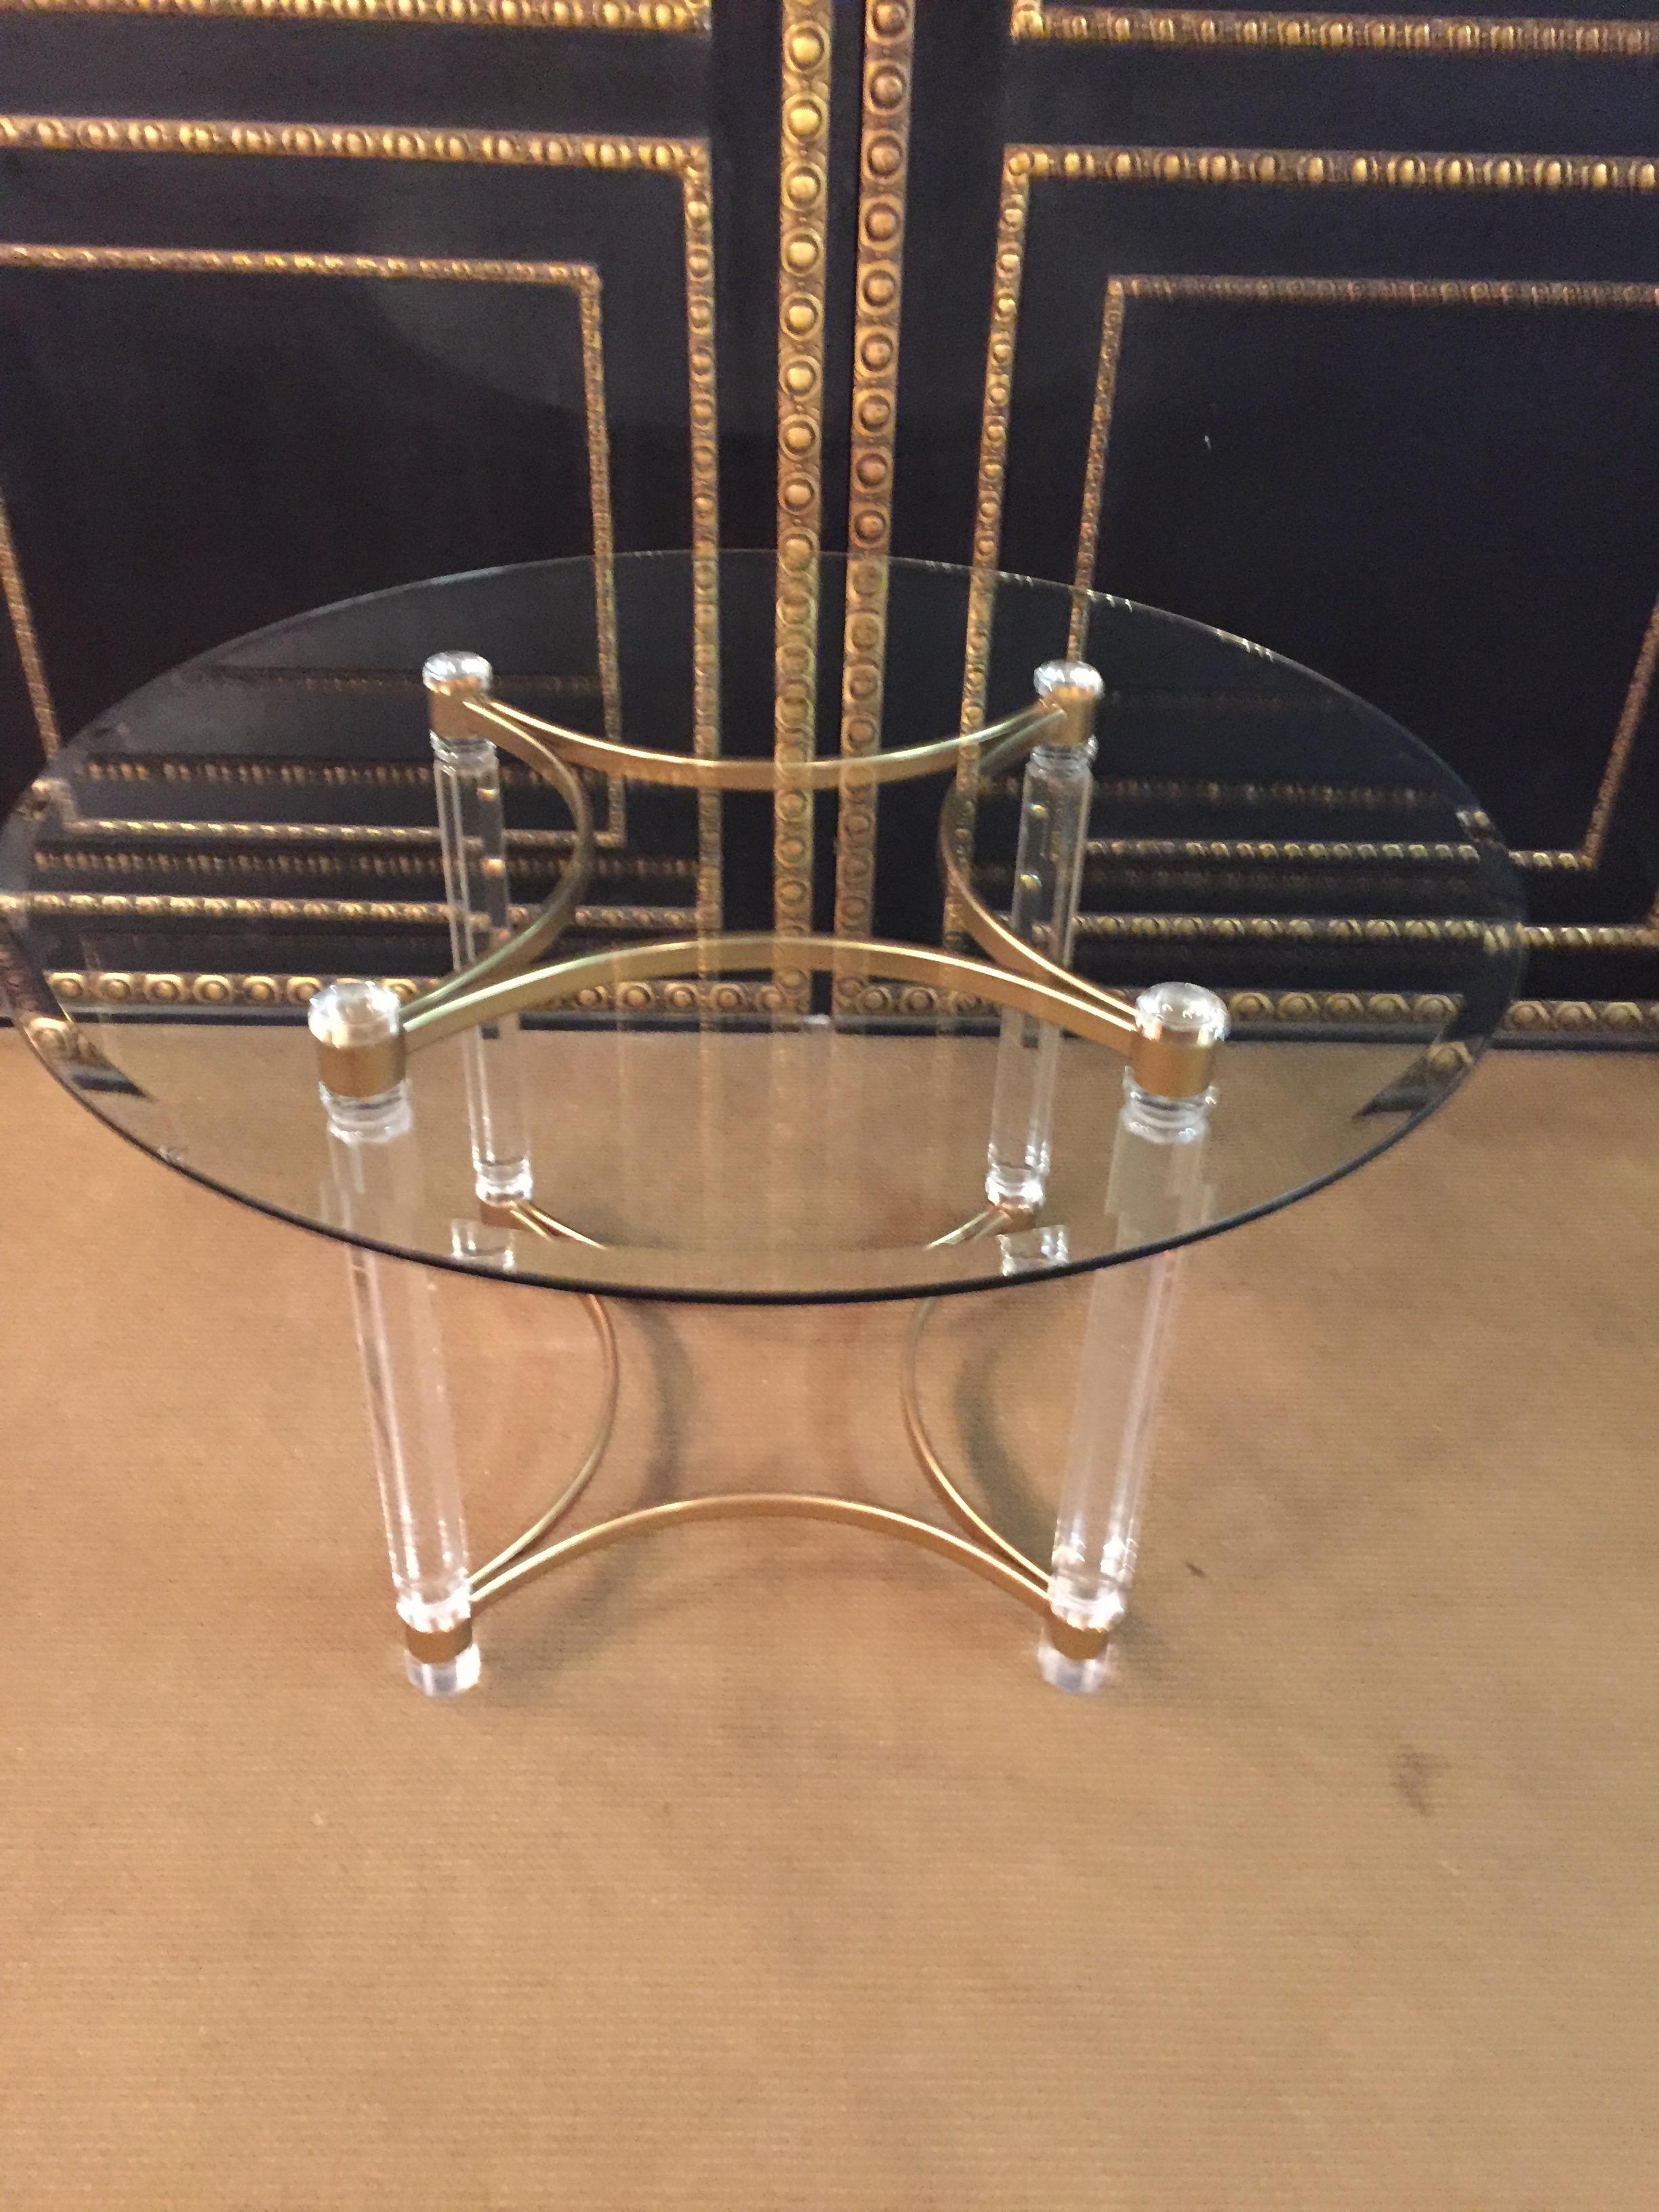 High quality acrylic dining table with acrylic columns legs,
the legs are connected at the bottom with a brass frame.
Round glass plate.